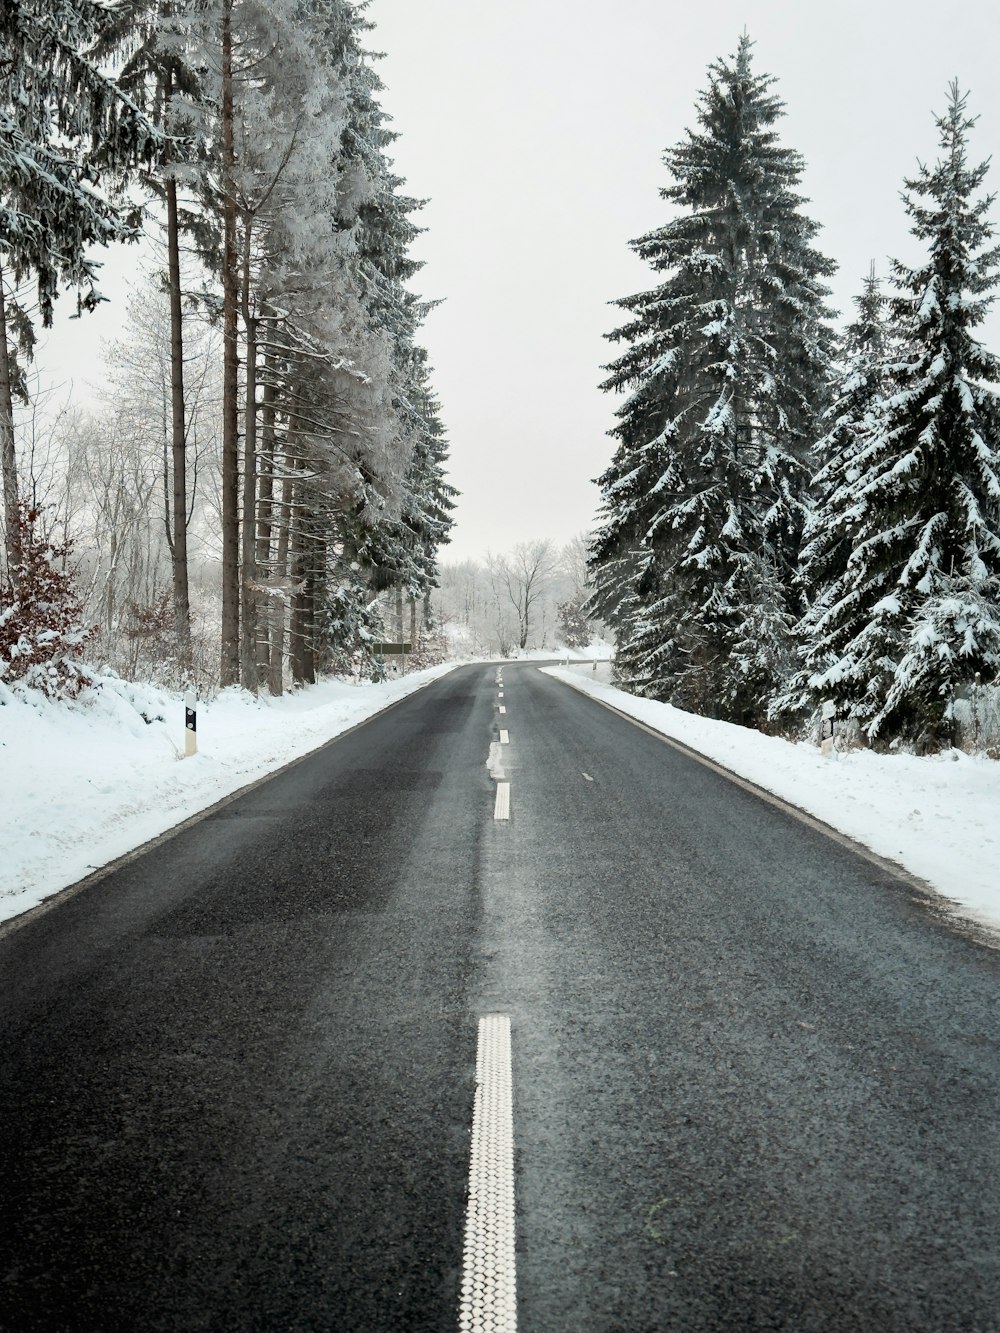 a road with snow on the ground and trees in the background